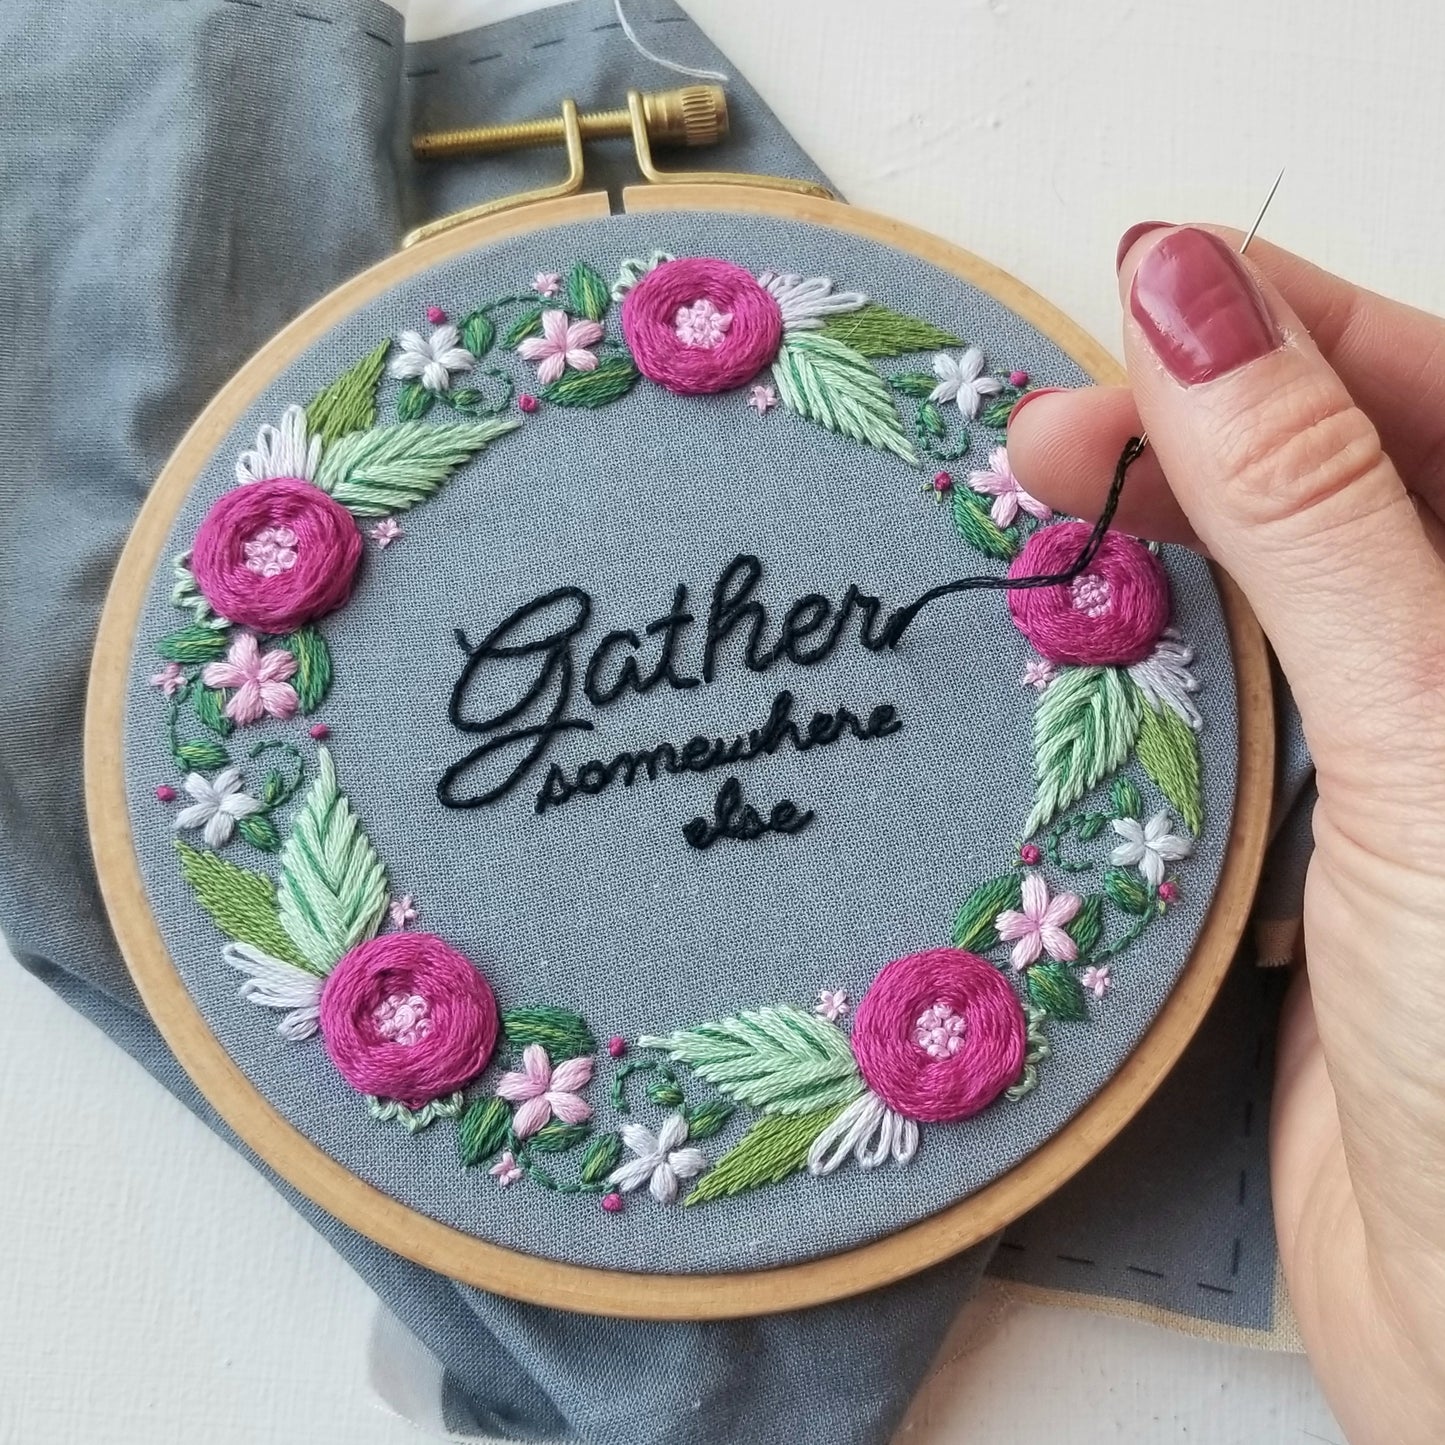 "Gather...somewhere else" Embroidery Kit